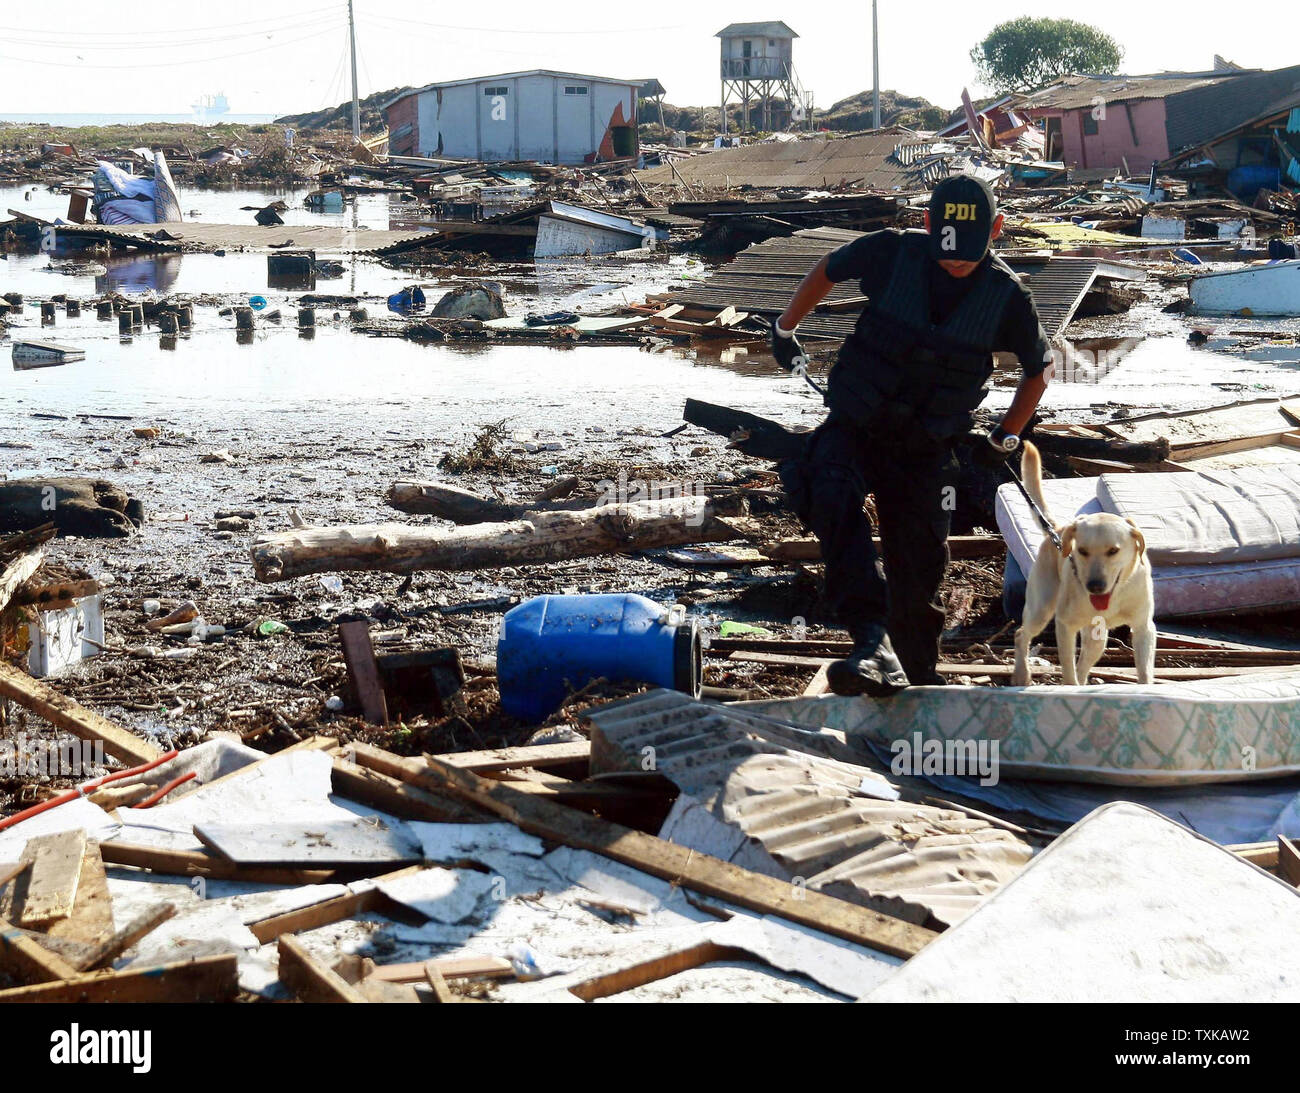 An officer searches for victims of a massive flooding following the Chilean earthquake in San Antonio, Chile on March 3, 2010. Areas of Chile have been devastated and hundreds have died after an 8.8 magnitude earthquake struck the country on February 27. UPI/Juan Francisco Jana Stock Photo